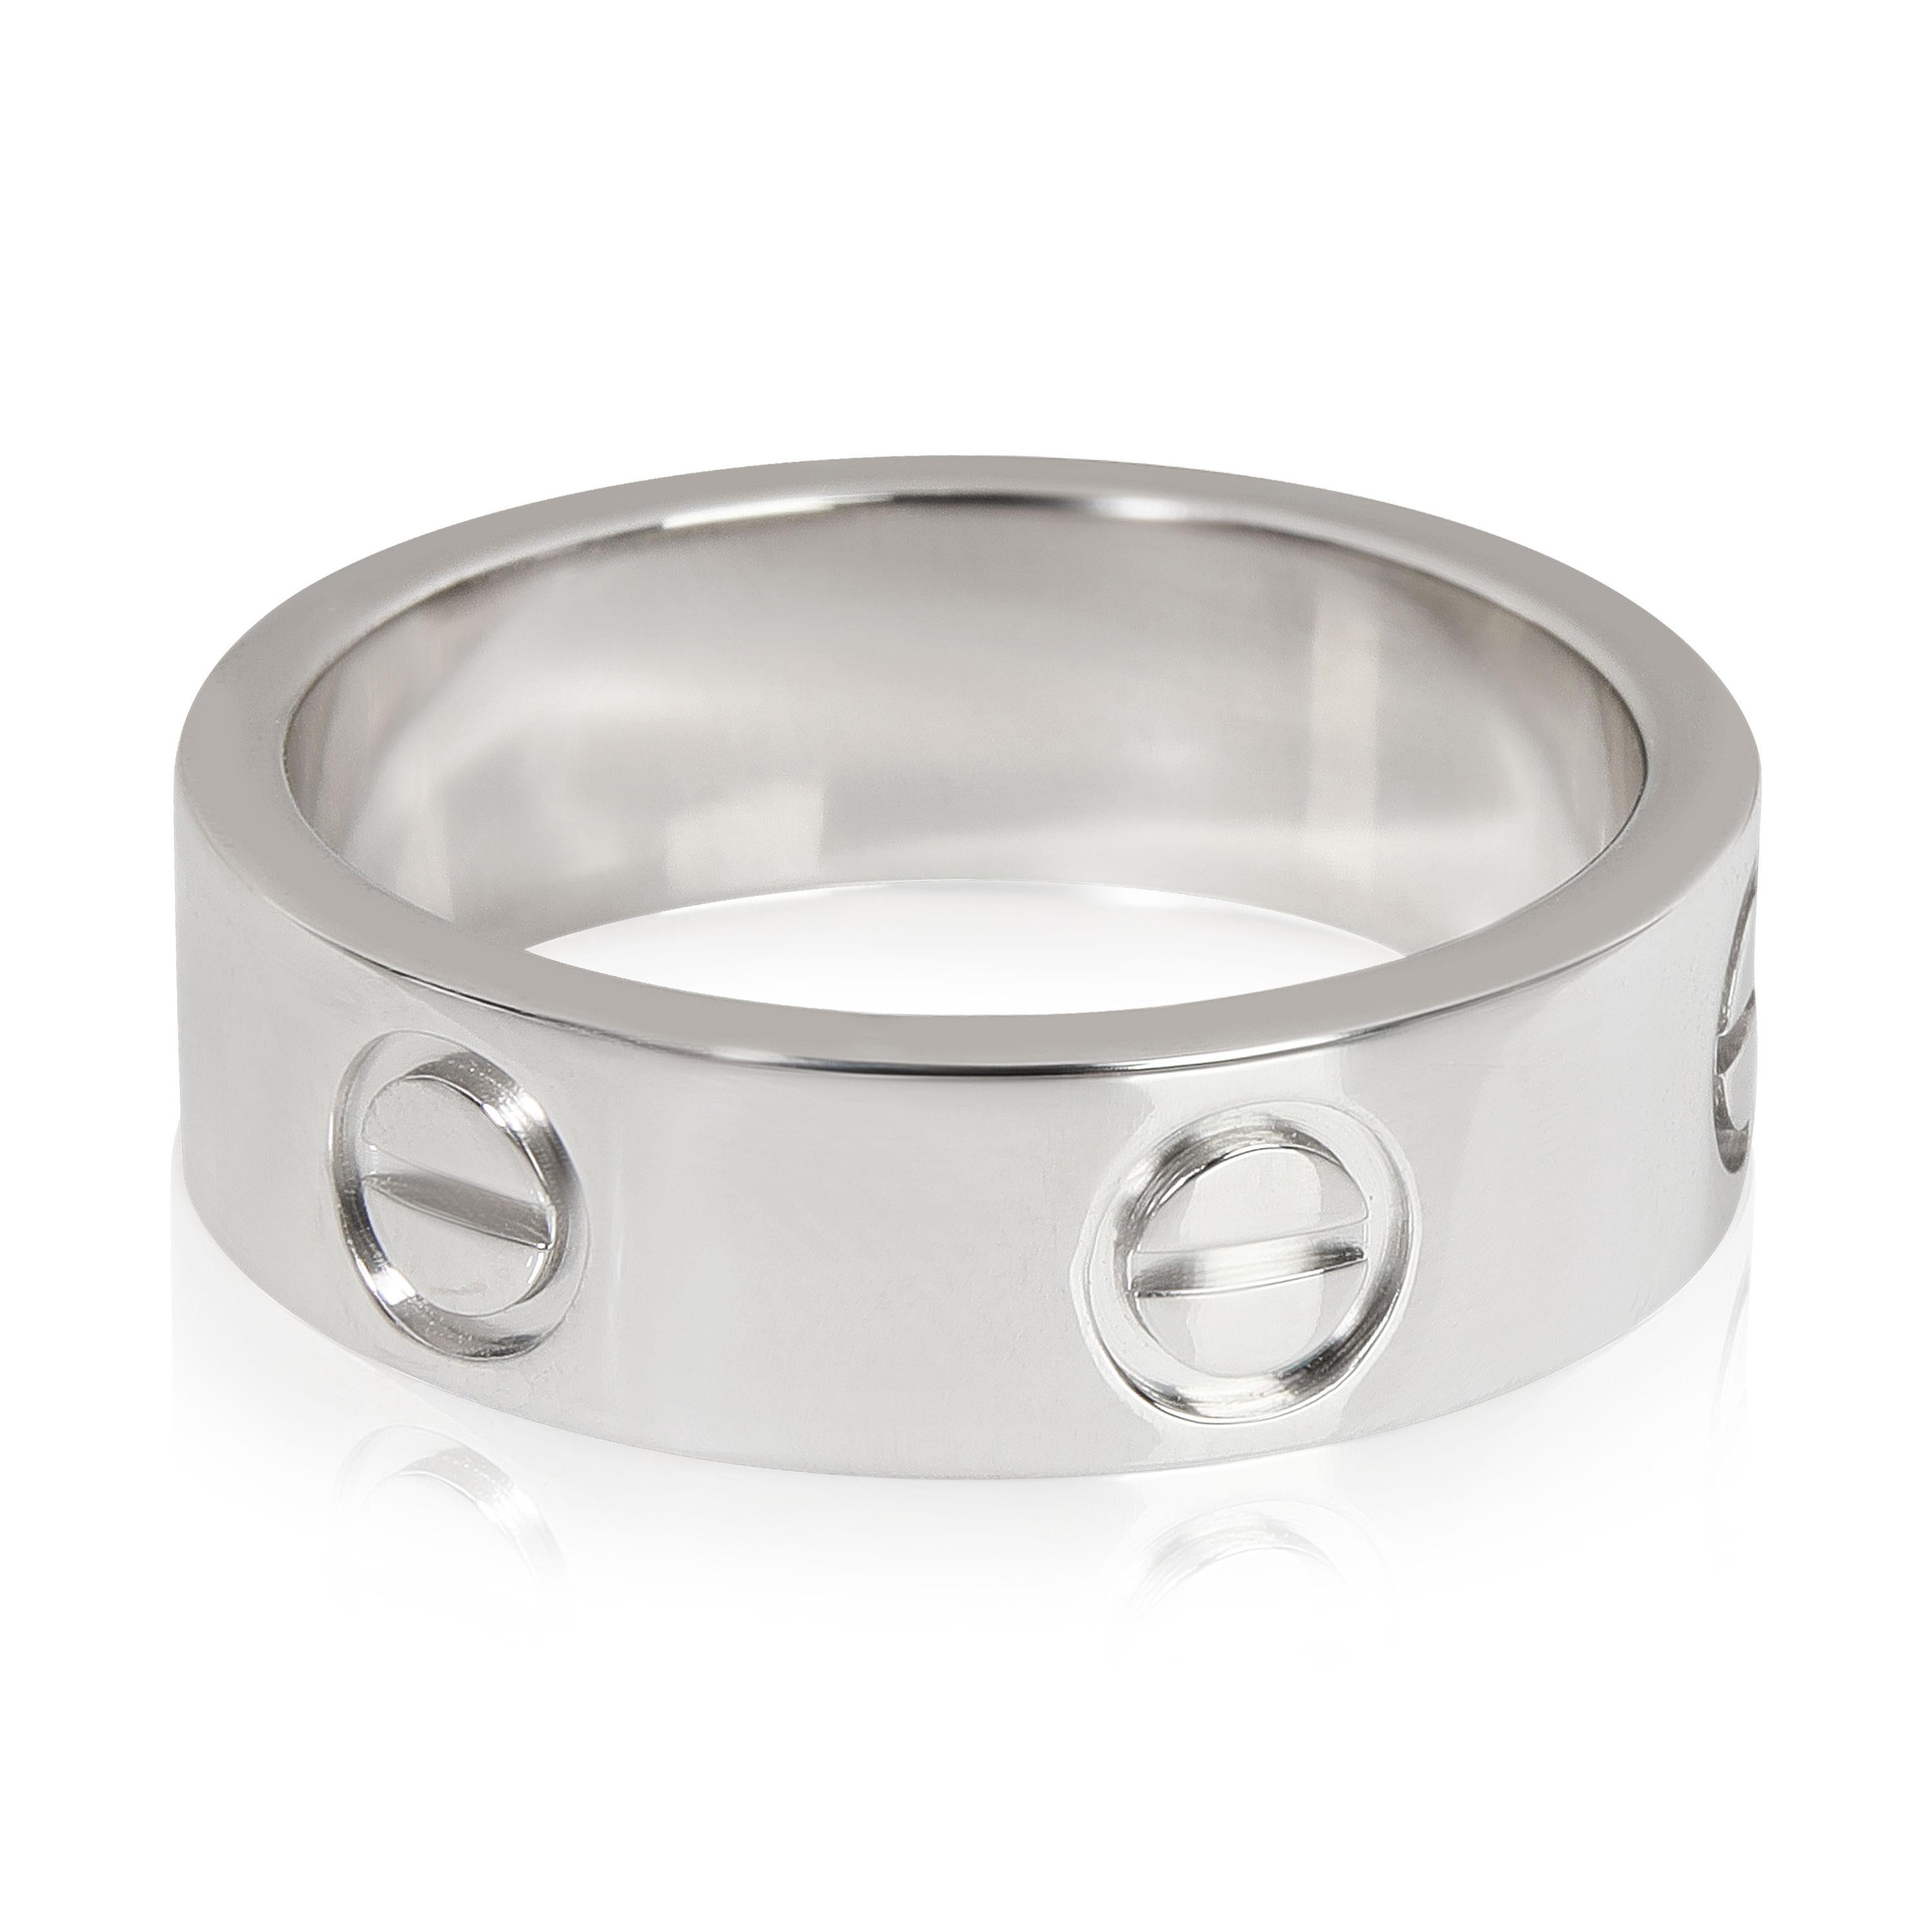 Cartier Love Ring in Platinum

PRIMARY DETAILS
SKU: 114038
Listing Title: Cartier Love Ring in Platinum
Condition Description: Retails for 4000 USD. In excellent condition and recently polished. Ring size is 50.Comes with Certificate of